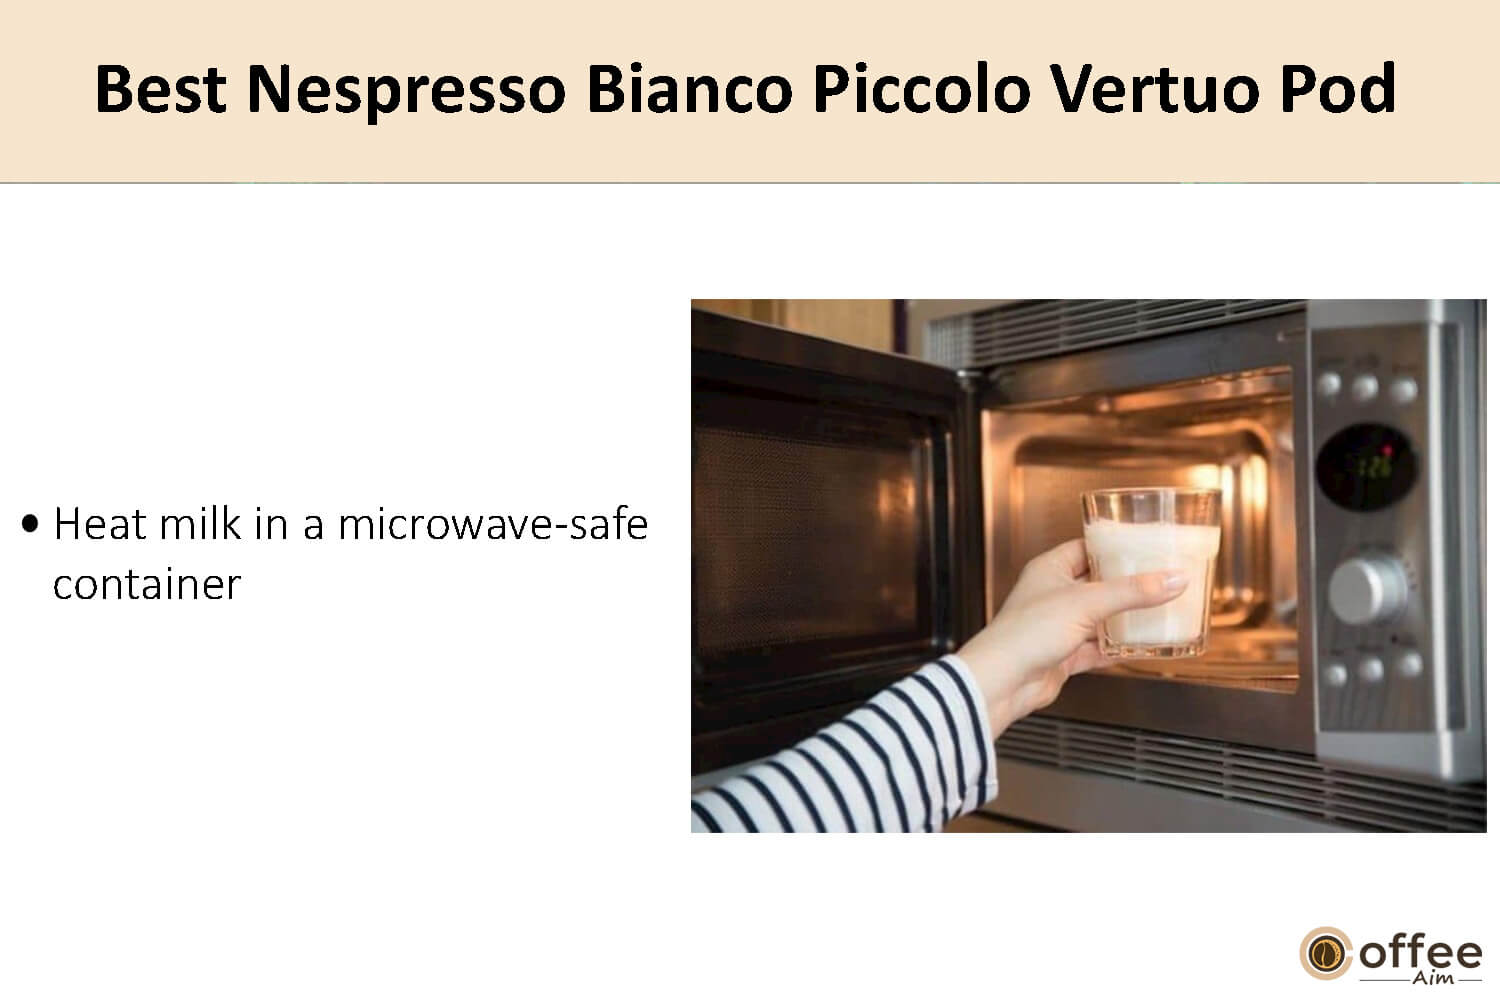 In this image, I elucidate the preparation instructions for crafting the finest Nespresso Bianco Piccolo Vertuo coffee pod.